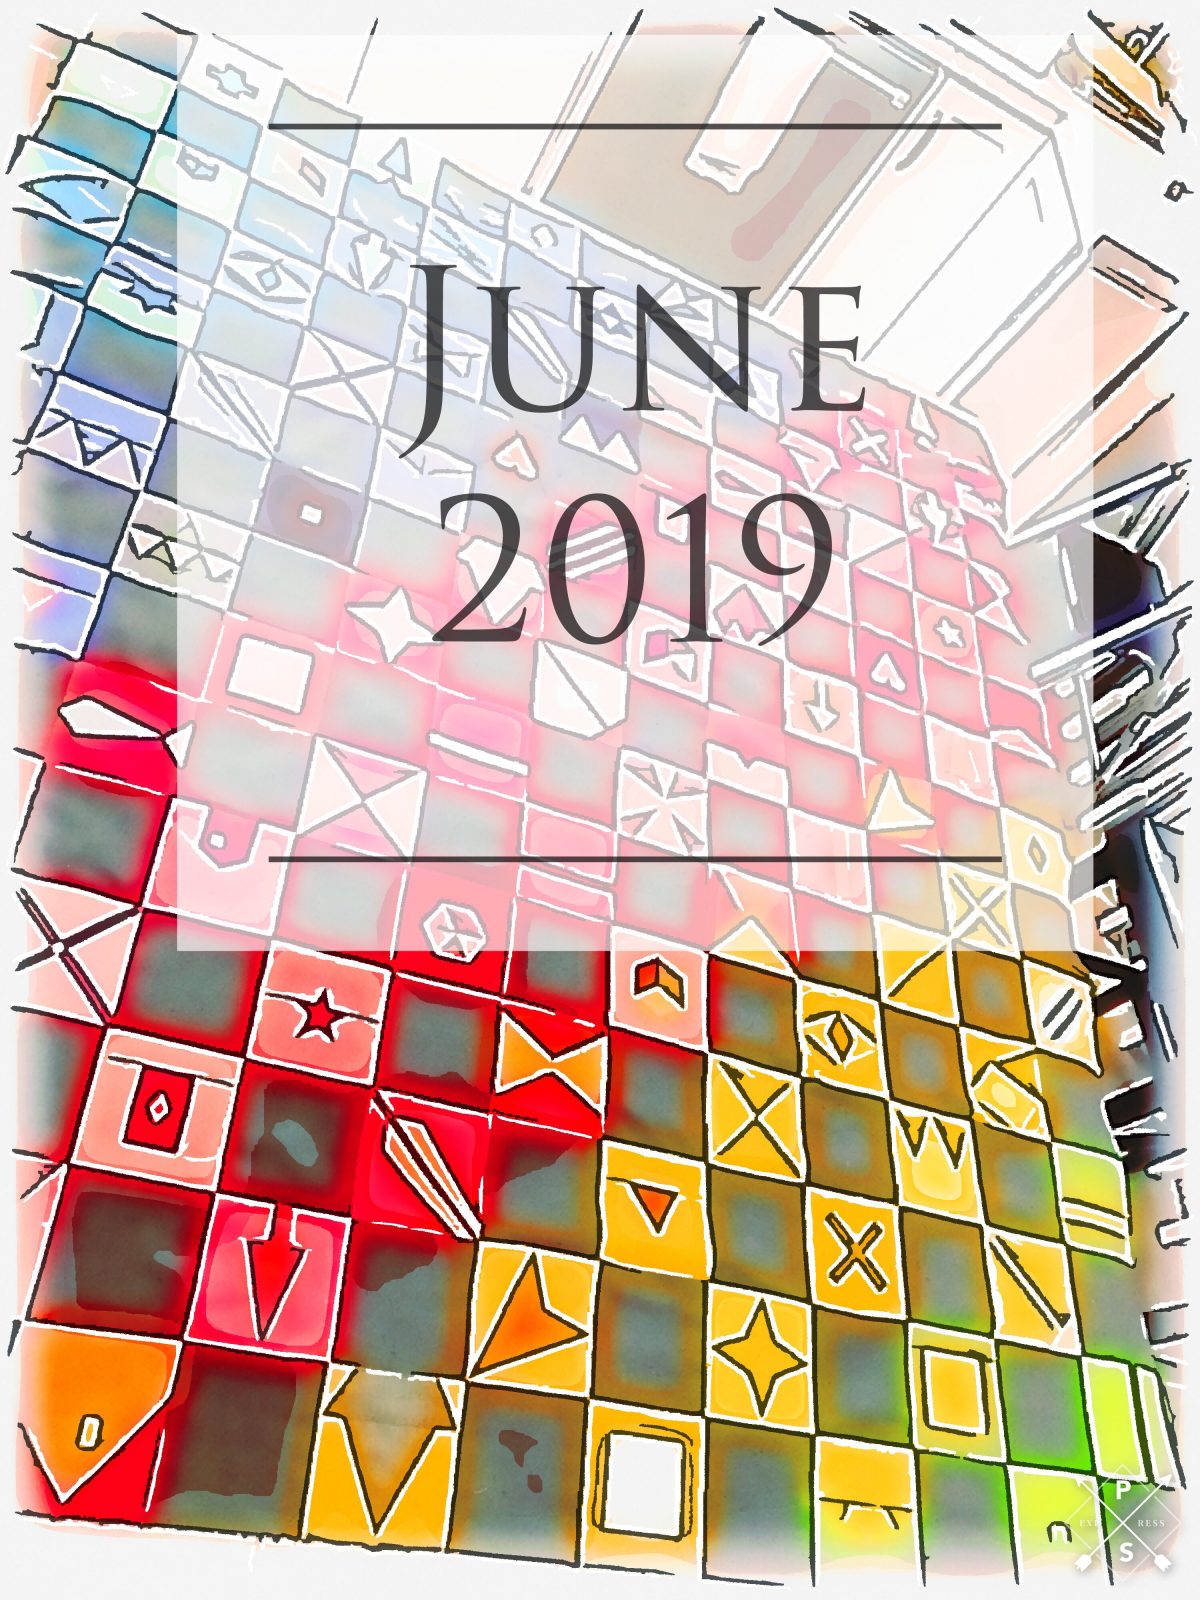 Quilt Diary: June 2019 here we come!